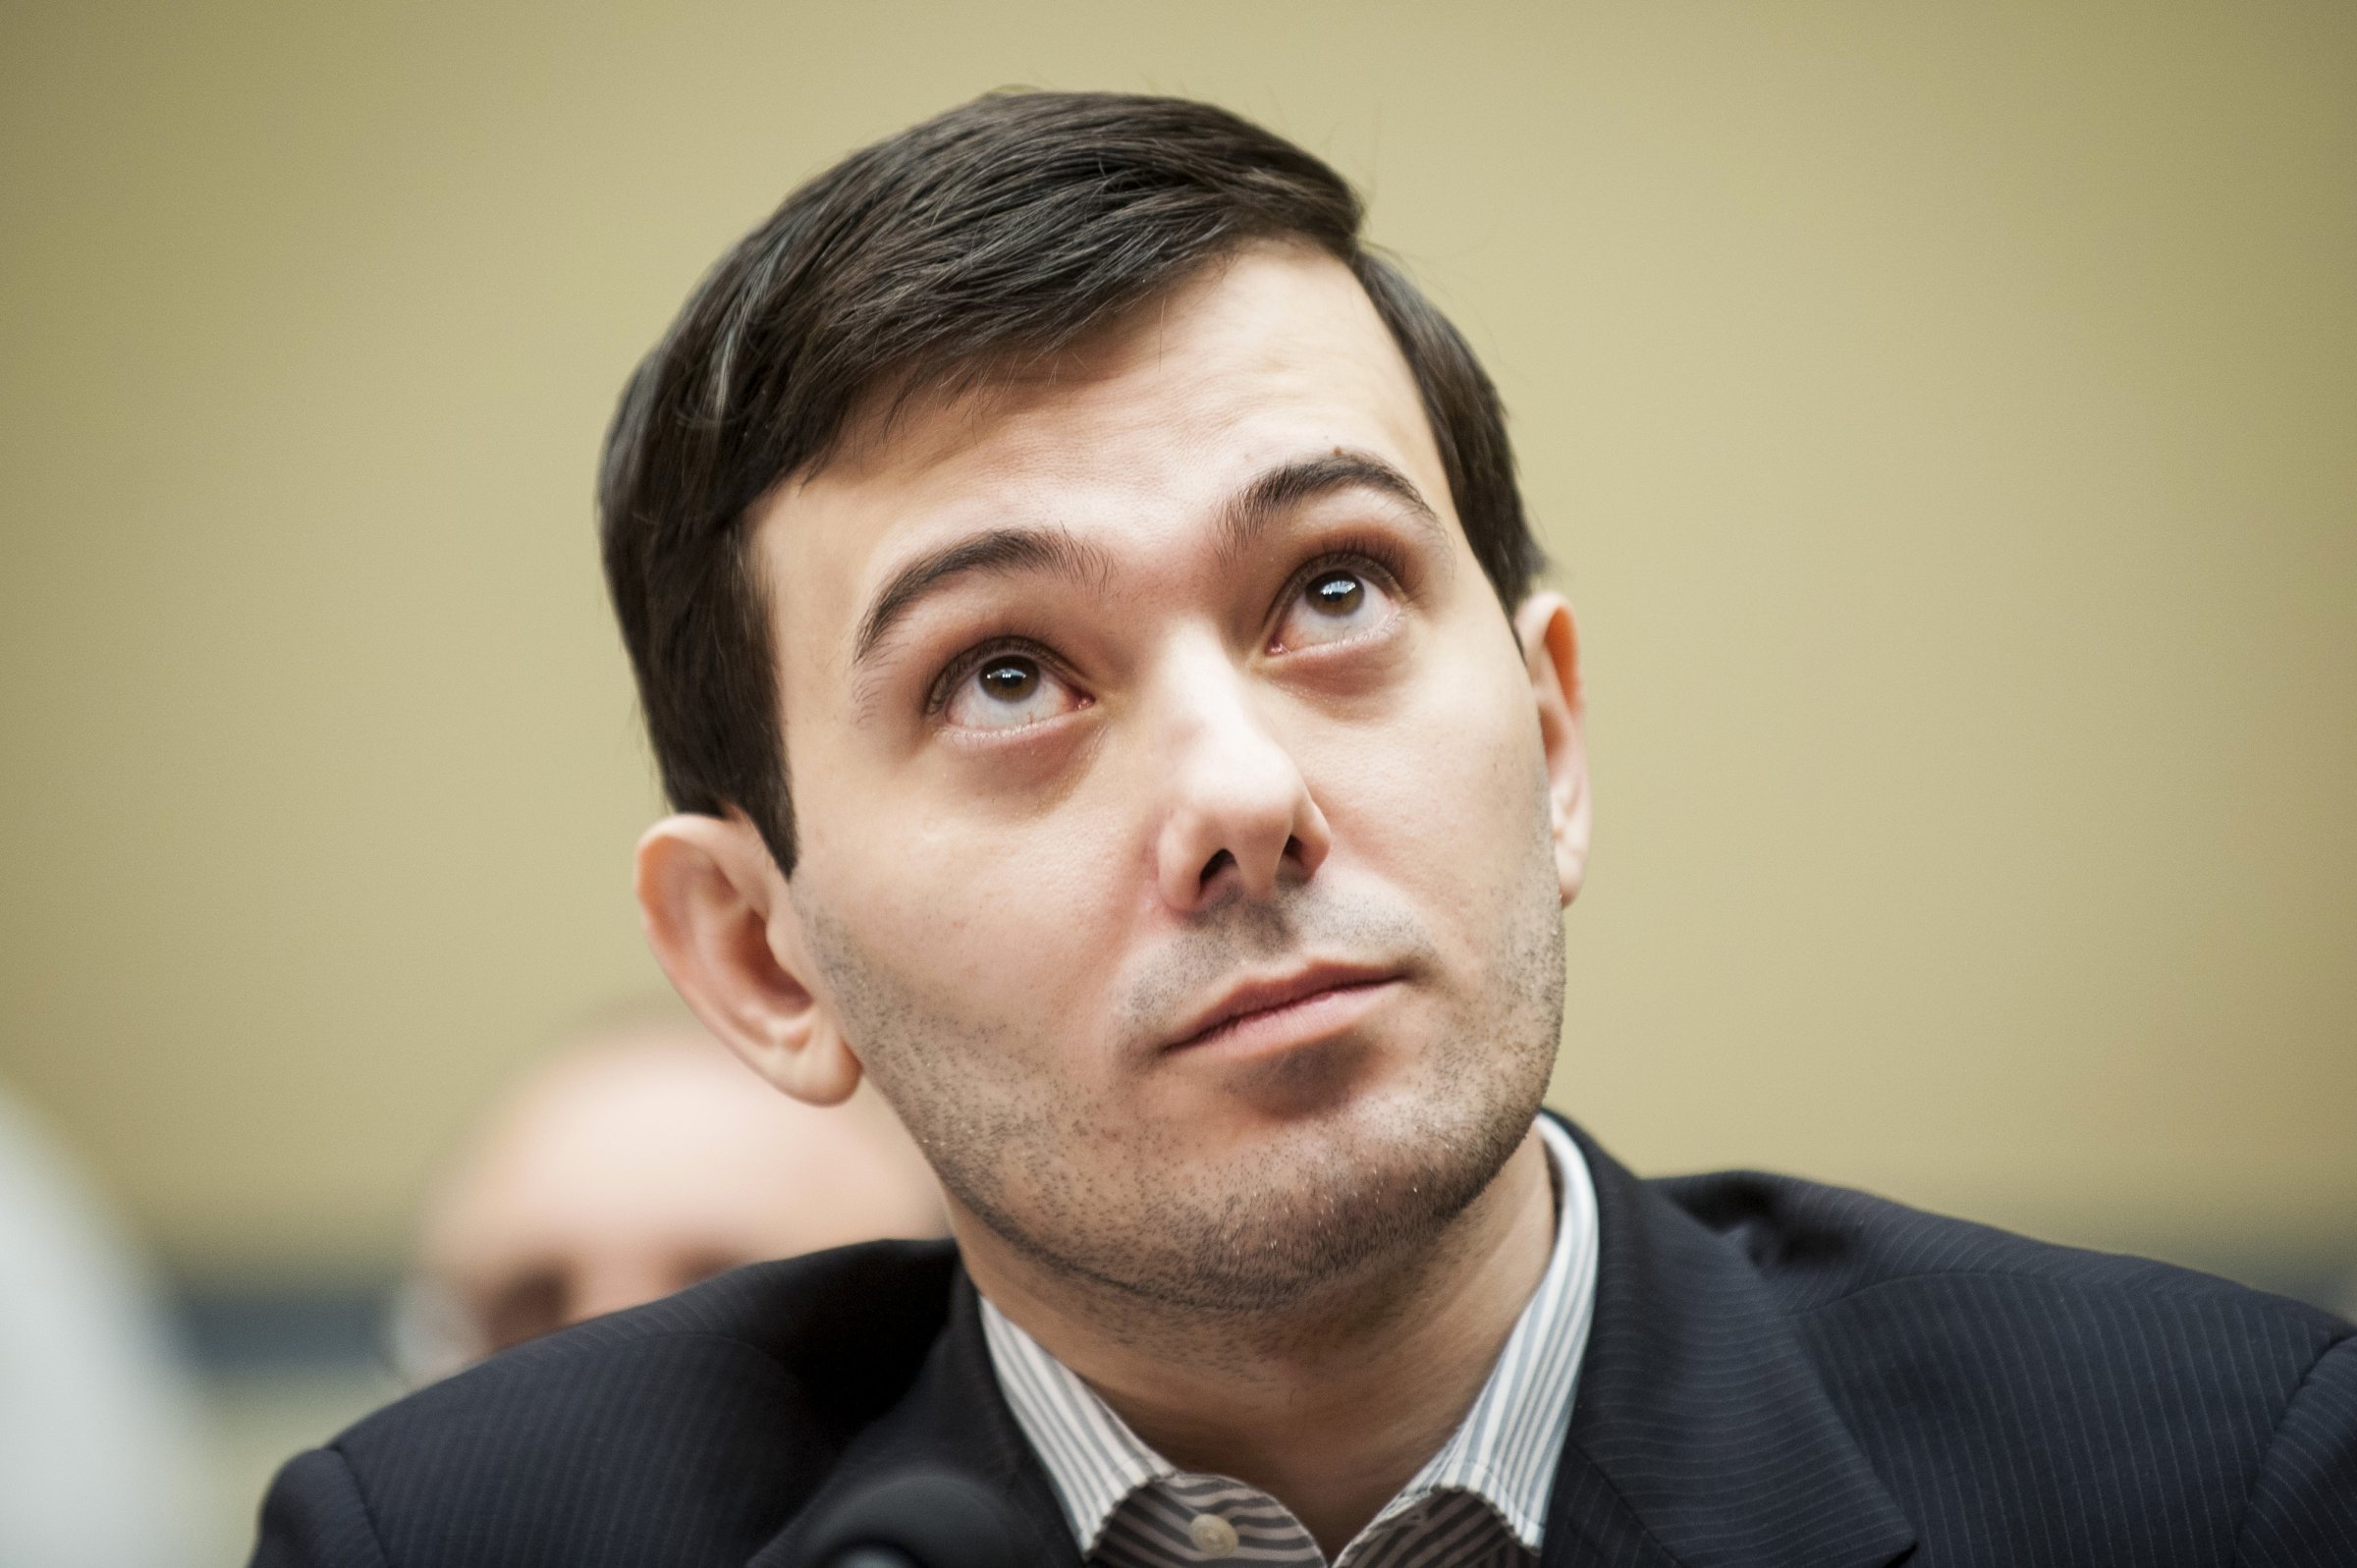 Martin Shkreli, former chief executive officer of Turing Pharmaceuticals LLC, reacts during a House Committee on Oversight and Government Reform hearing on prescription drug prices in Washington, D.C., on Feb. 4, 2016.